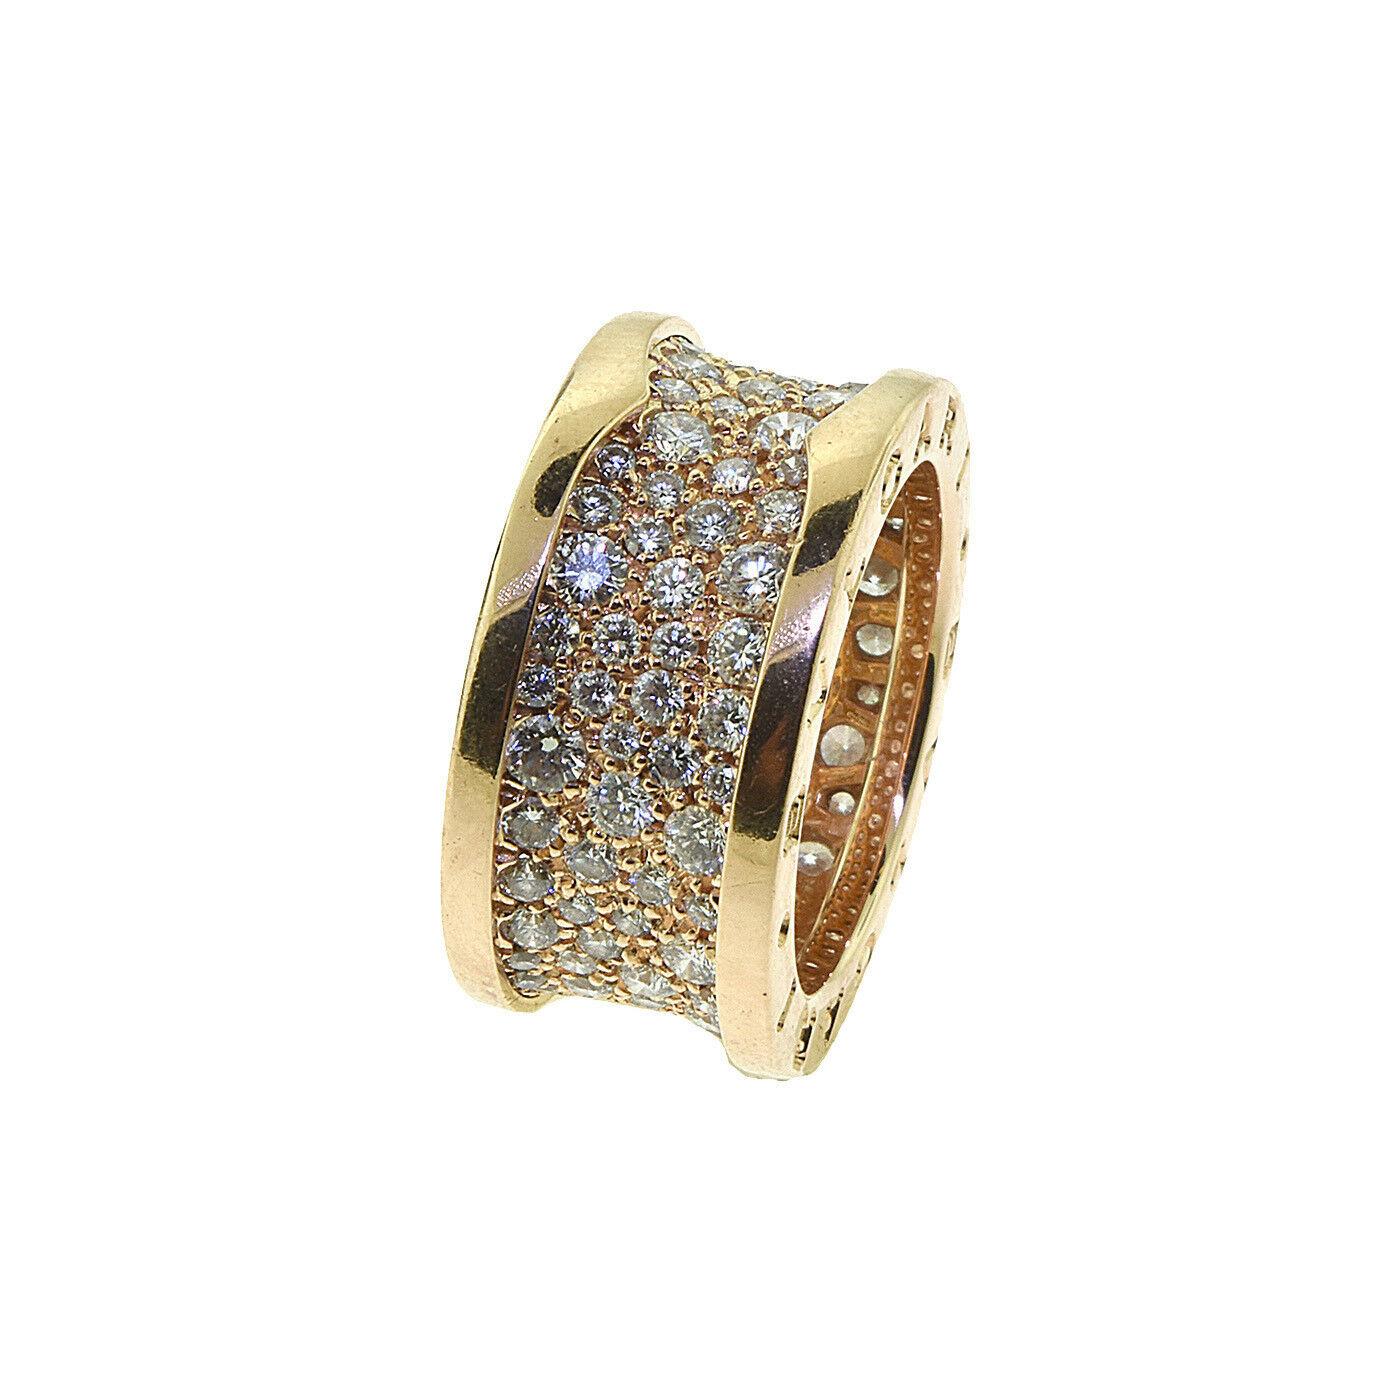 Brilliance Jewels, Miami
Questions? Call Us Anytime!
786,482,8100

Designer: Bvlgari

Collection: B.zero1

Style: 4 Band Ring

Metal: Rose Gold

Metal Purity: 18k

Stones: Round Brilliant Cut Diamonds 

Ring Size: 49 (euro) ; 5 (US)

Hallmark: 49